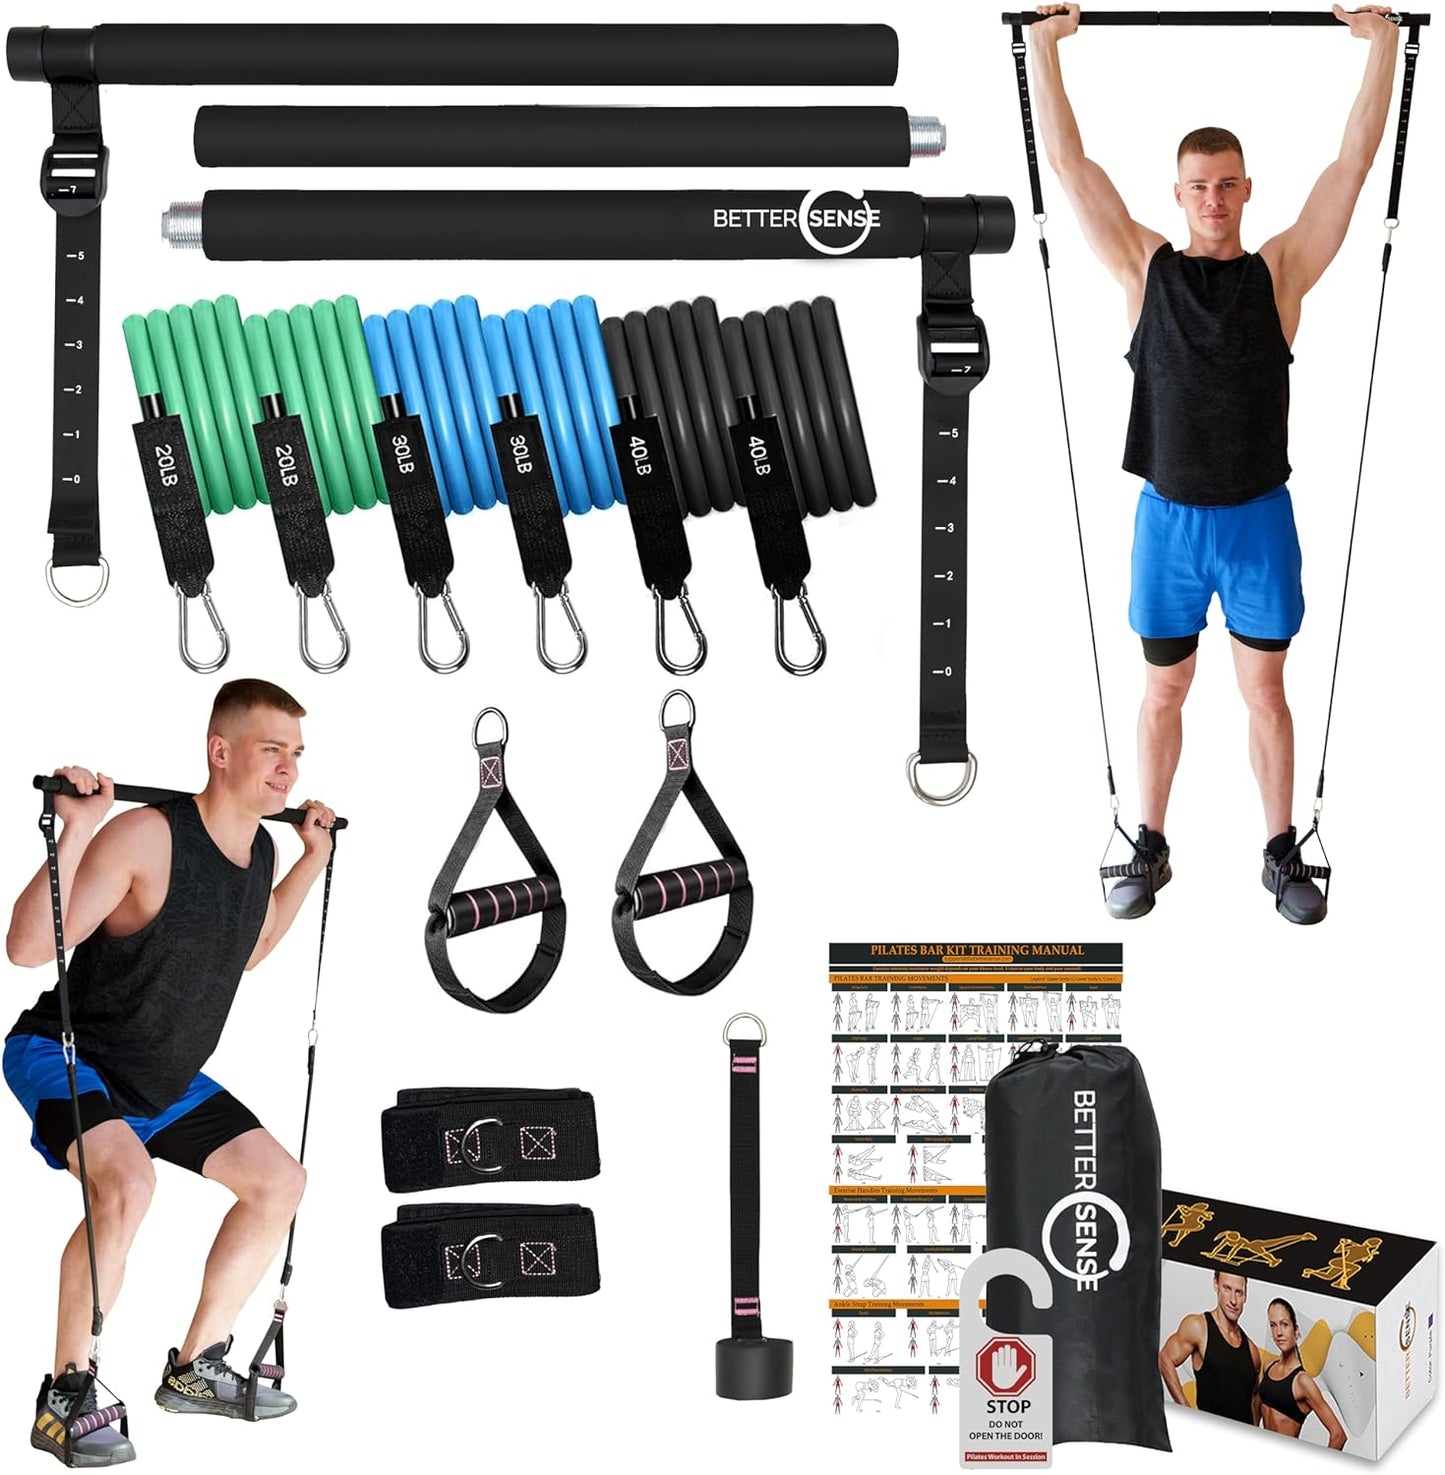 Upgraded Pilates Bar Kit – 39” Adjustable Exercise Equipment for Men, Women with 6X 20, 30, 40 lbs Resistance Bands with Adjustment Buckle – Pilates Equipment for Home Workouts for All Fitness Levels